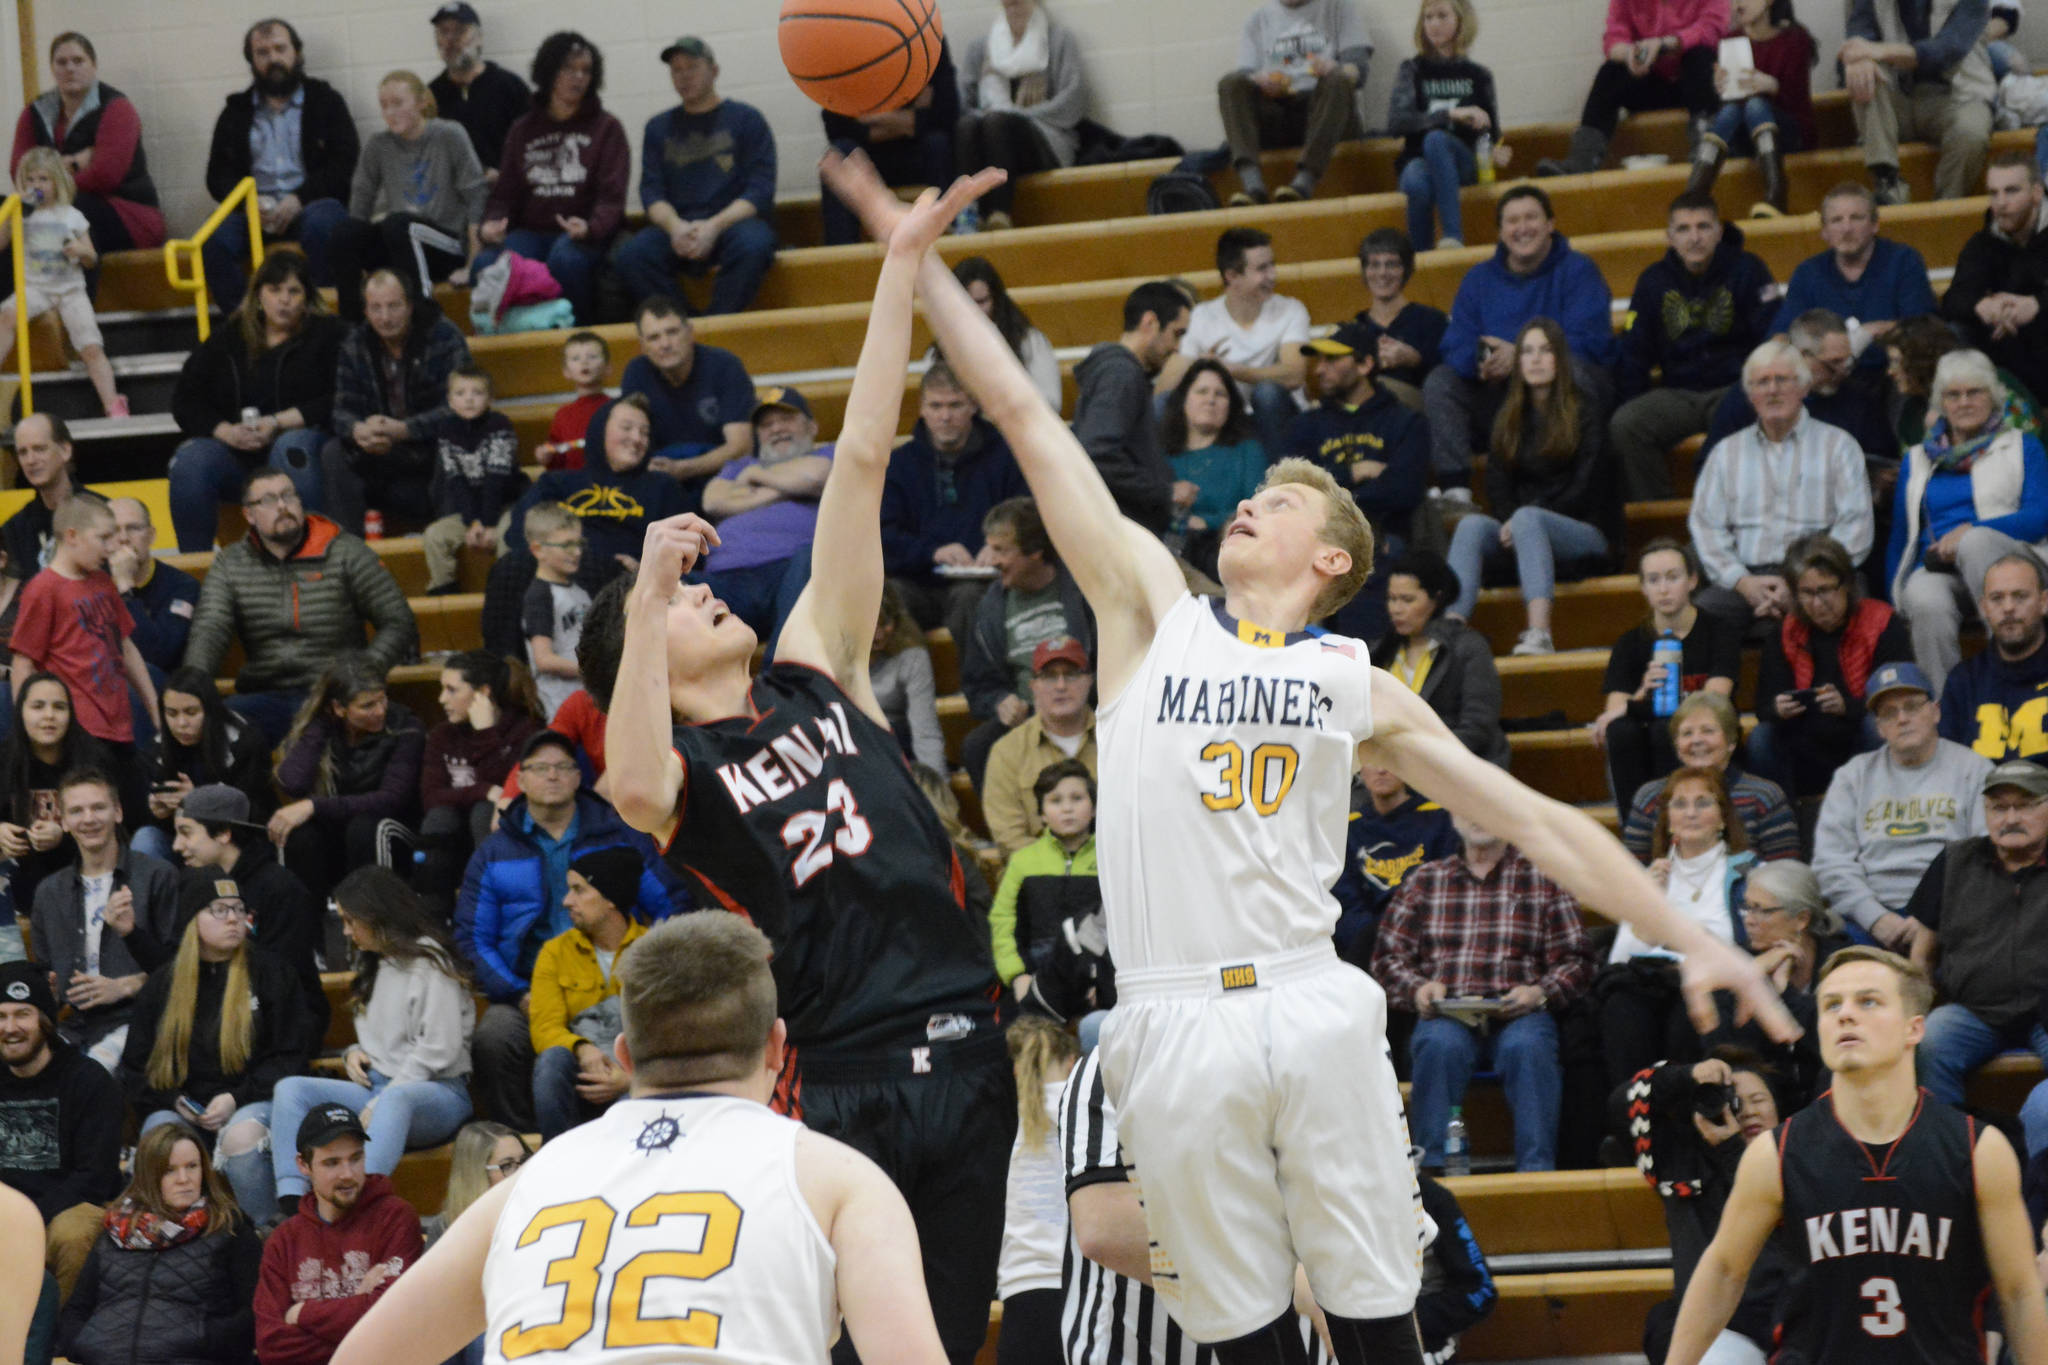 Mariner Japheth McGhee wins the tip-off during a basketball game between the Homer Mariners and the Kenai Kardinals on Friday, Dec. 21, 2018, at the Homer High School Alice Witte Gym in Homer, Alaska. (Photo by Michael Armstrong/Homer News)